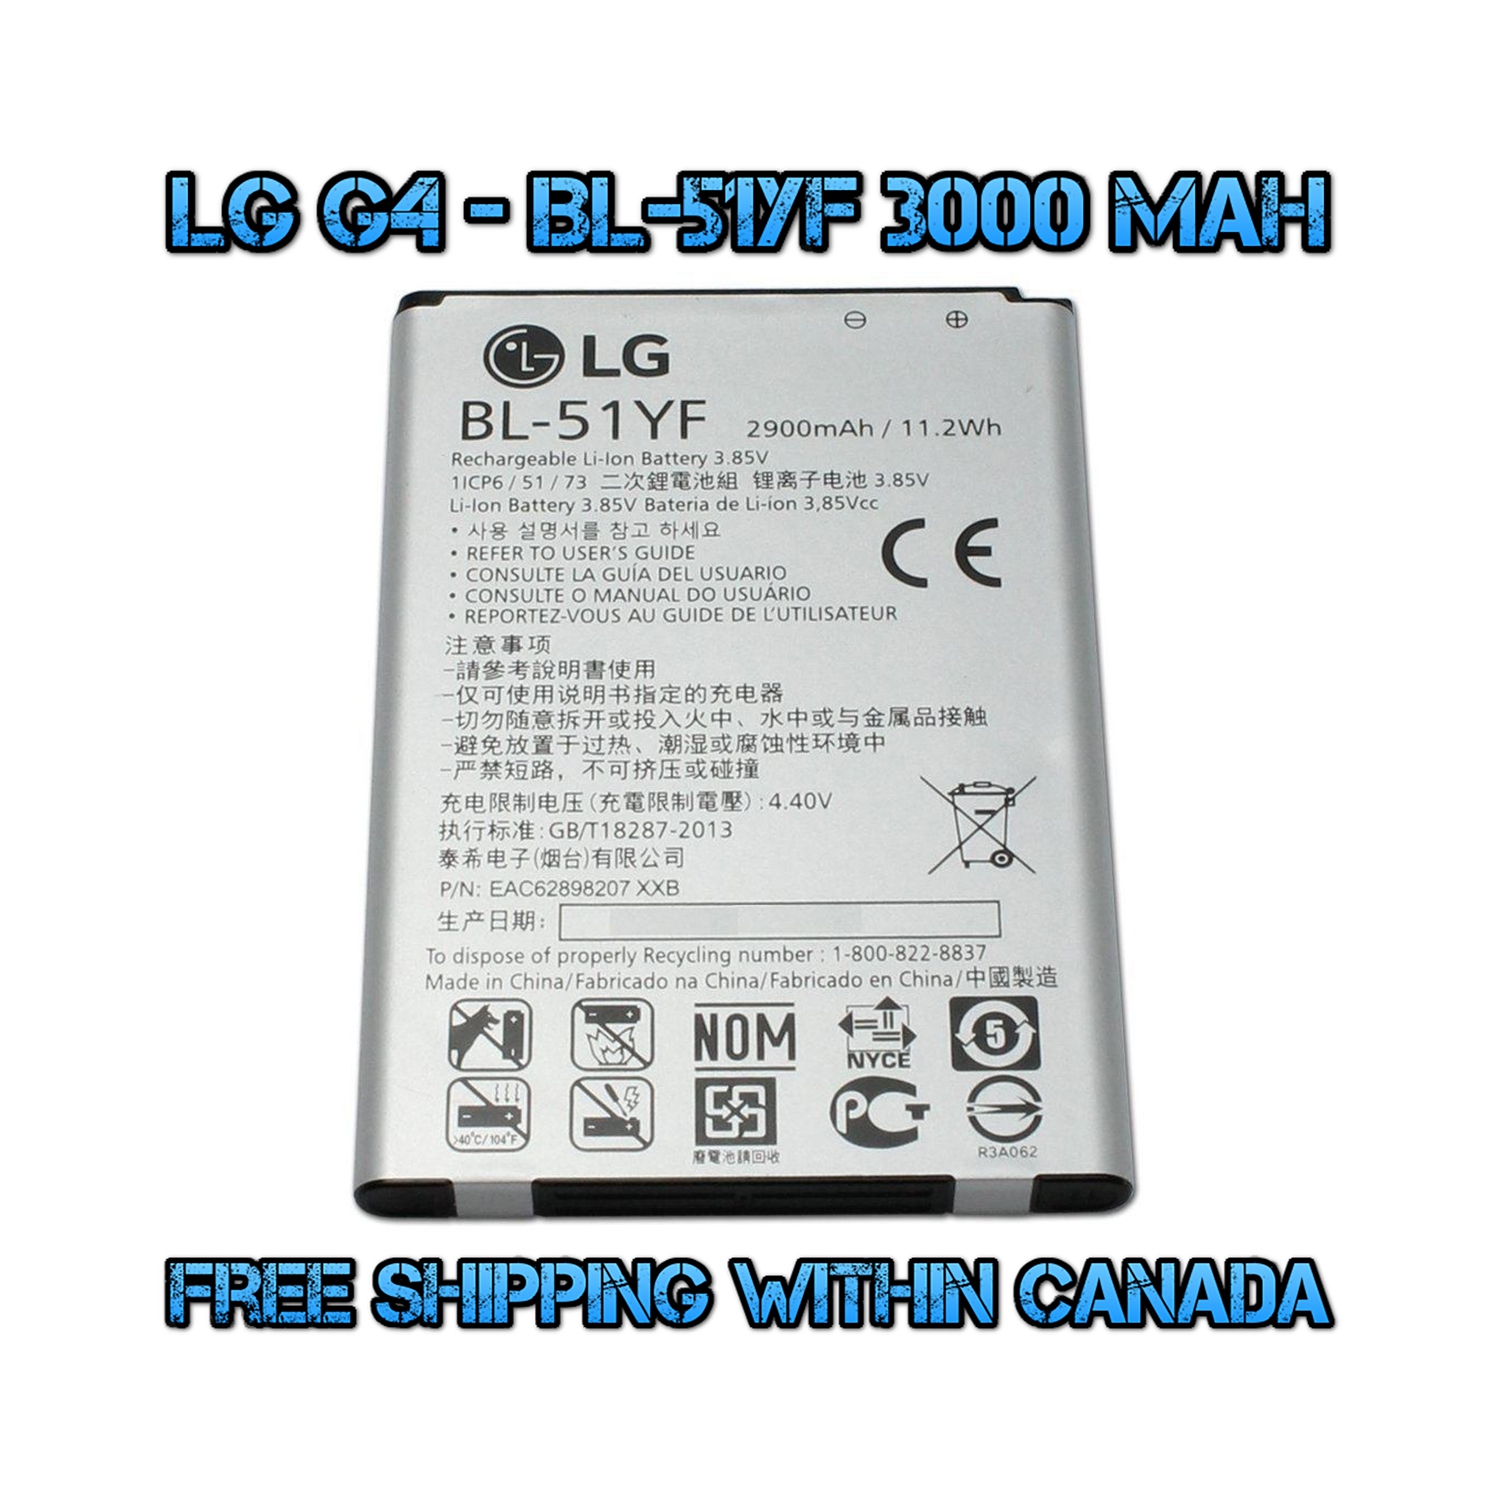 New OEM Replacement Battery Model BL-51YF 3000 mAh for LG G4 H812 H810 H811 H815 VS986 LS991 US991 - (FREE SHIPPING)